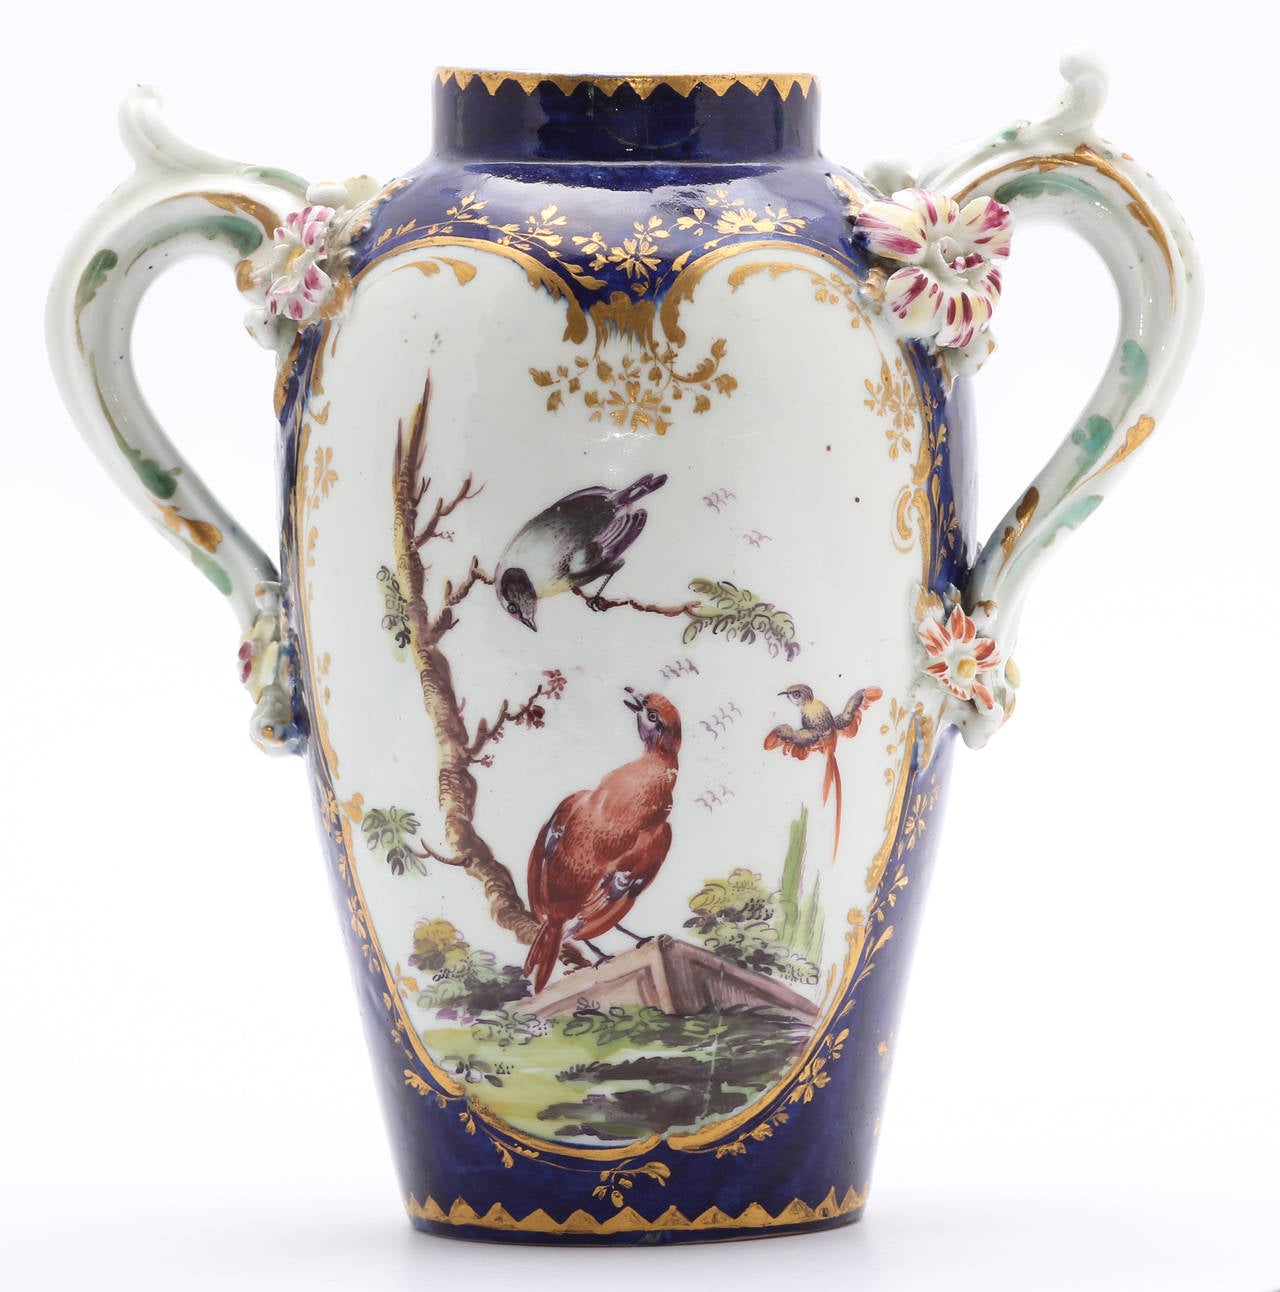 Derby vase with short neck, superbly painted with large panels to either side within gilt rococo frames, on a deep blue ground with large scroll handles picked out in turquoise, the terminals with applied colourful handles, the decoration consisting